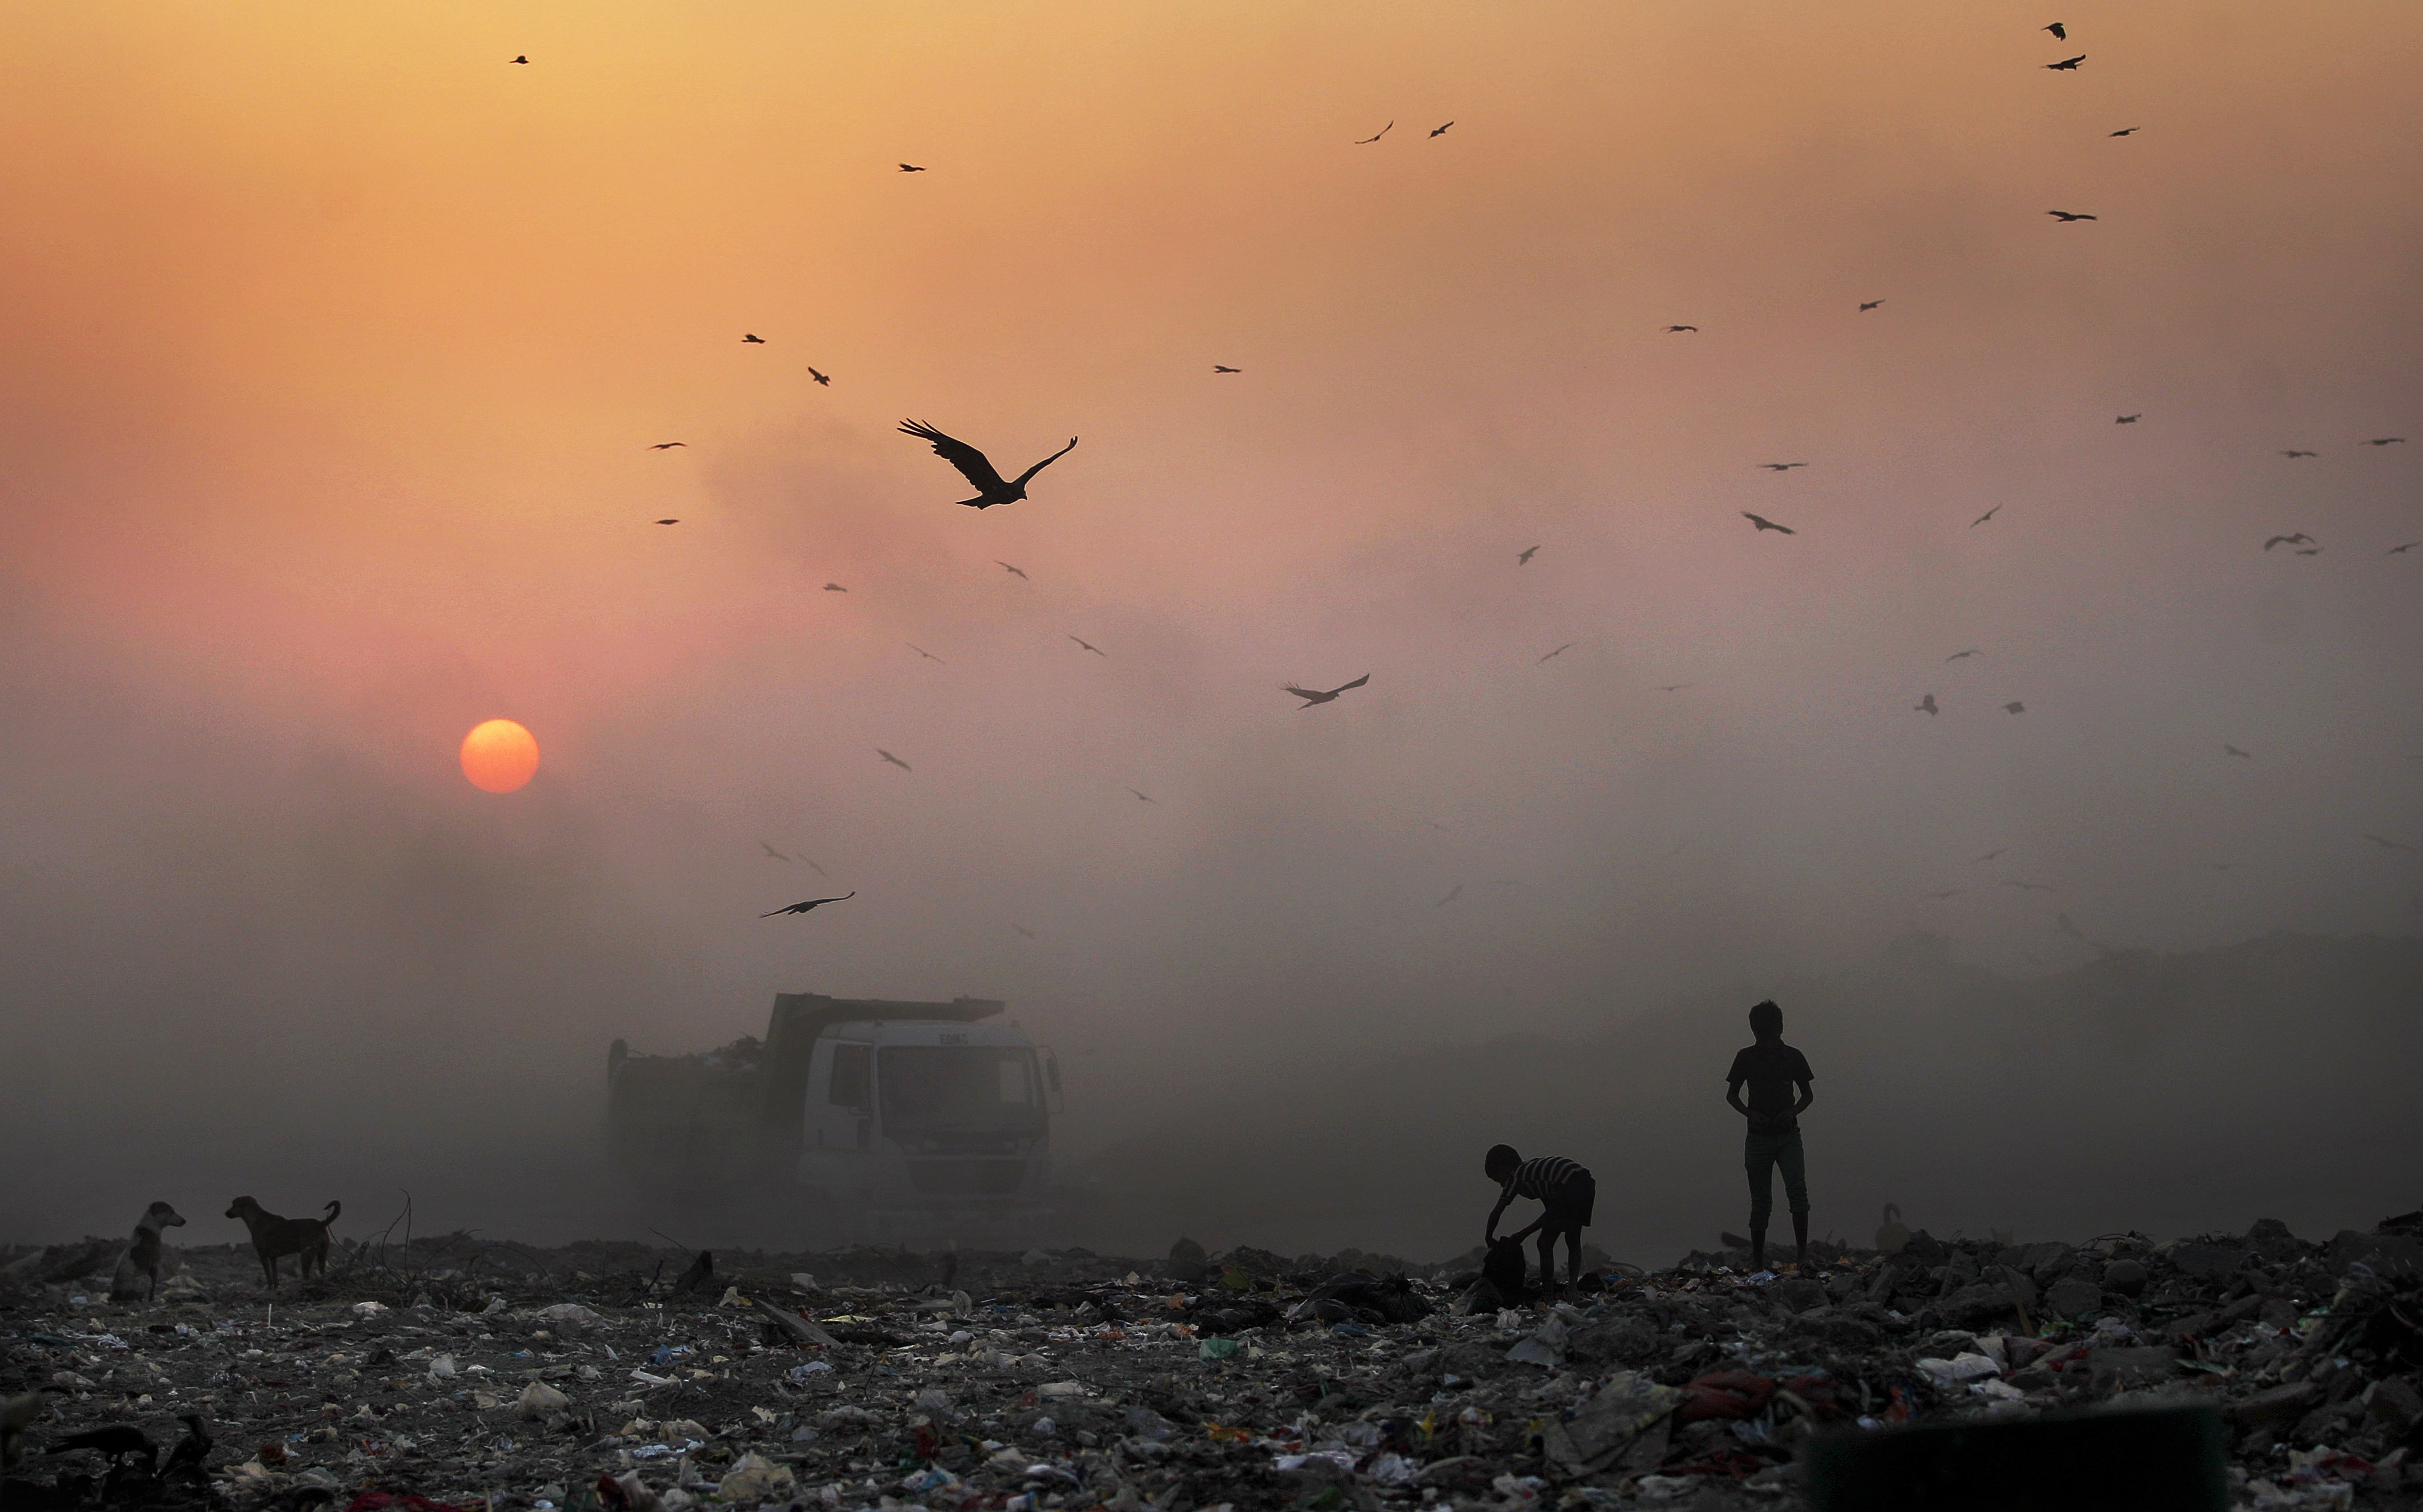 A thick blanket of smoke is seen against the setting sun as young ragpickers search for reusable material at a garbage dump in New Delhi, India on October 17, 2014. Photo: AP 